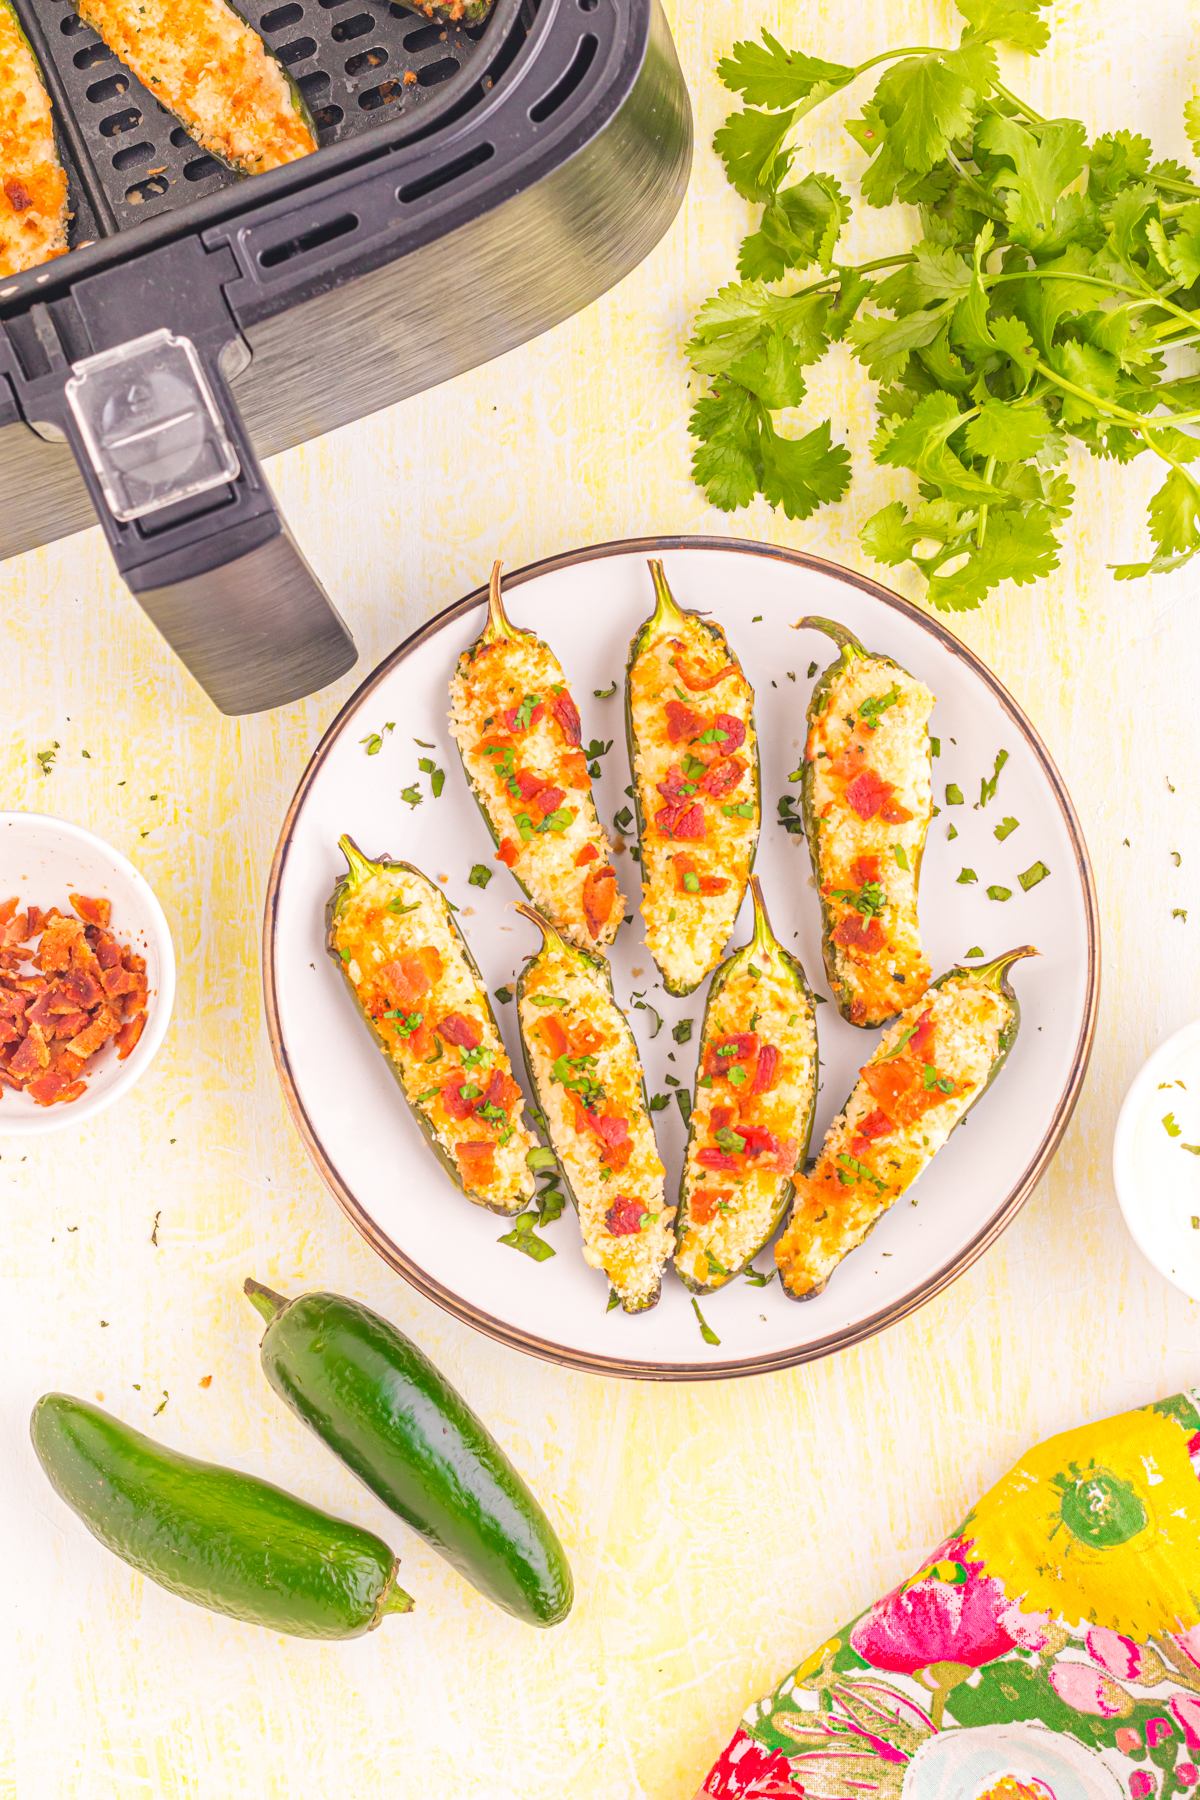 Jalapeno poppers on table with air fryer and ingredients.
